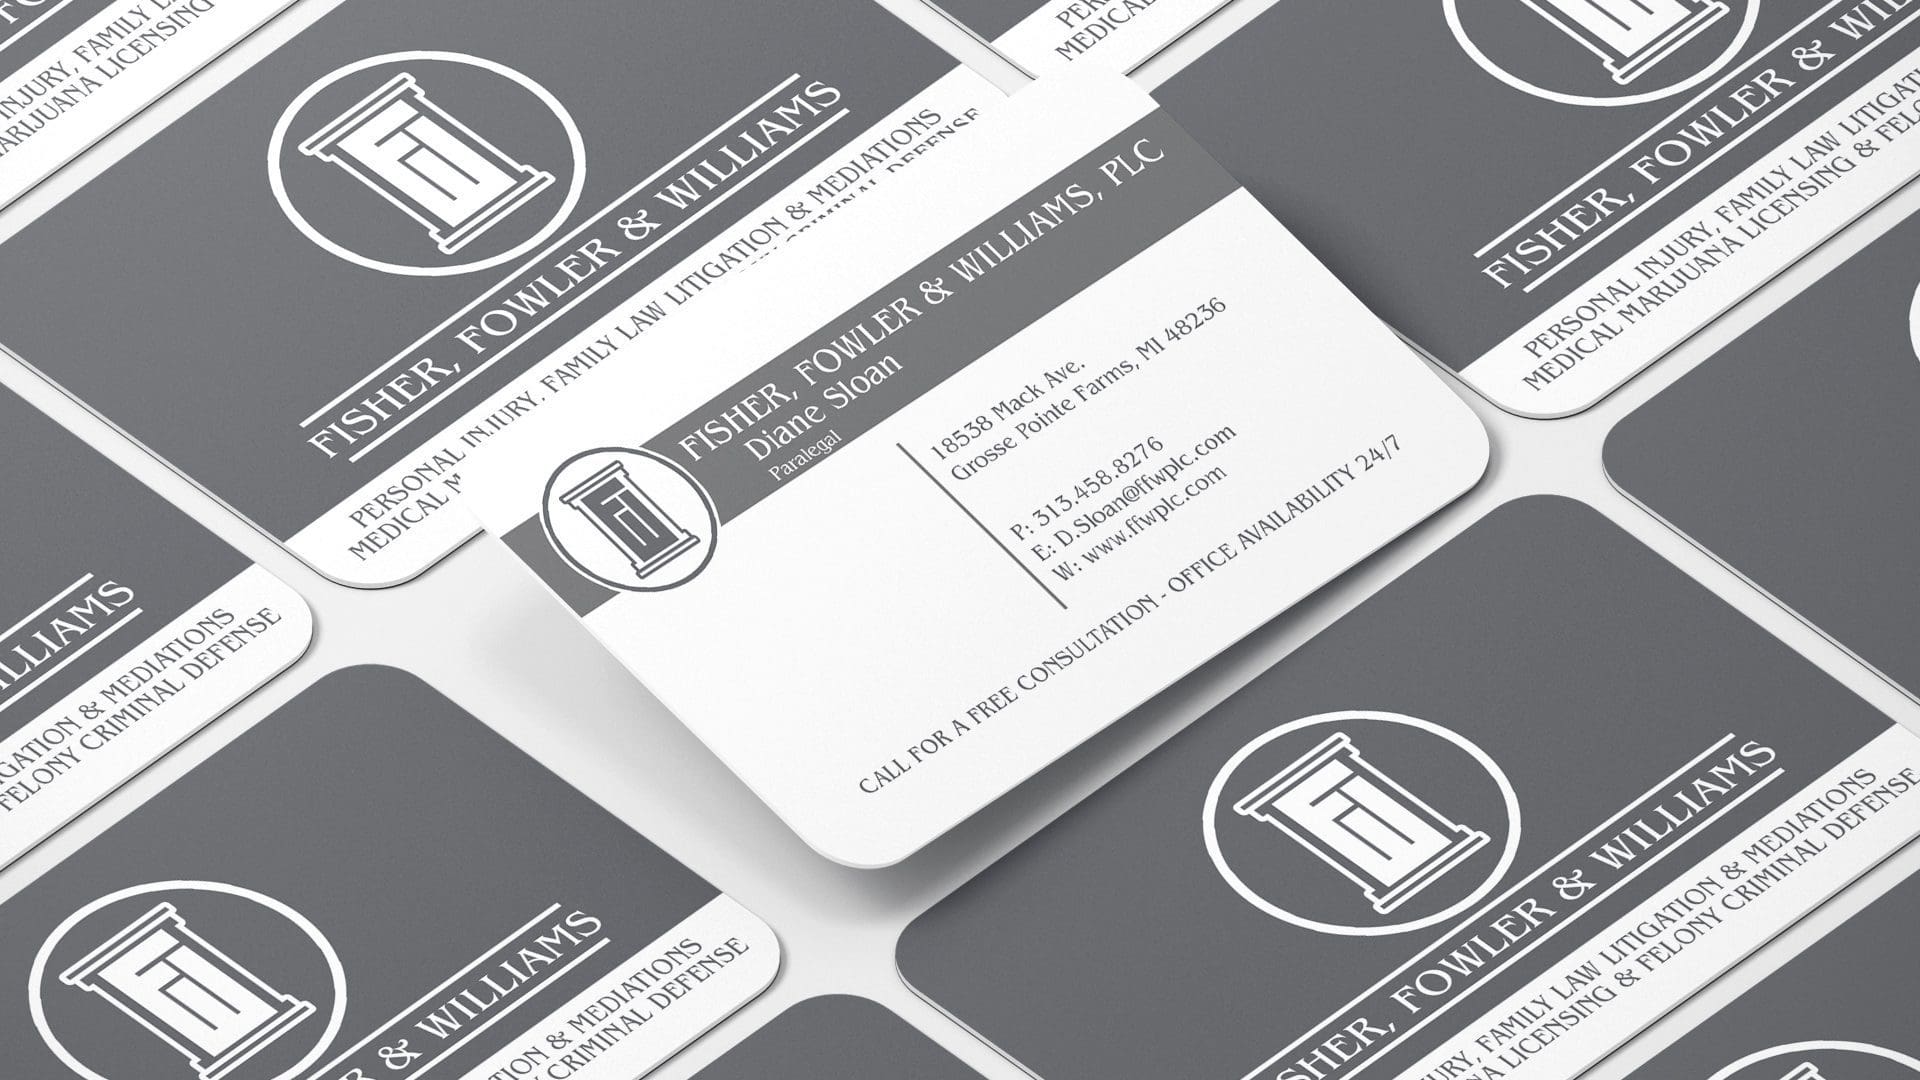 Fowler and Williams – Matte Business Card with Rounded Corners Mockup 03